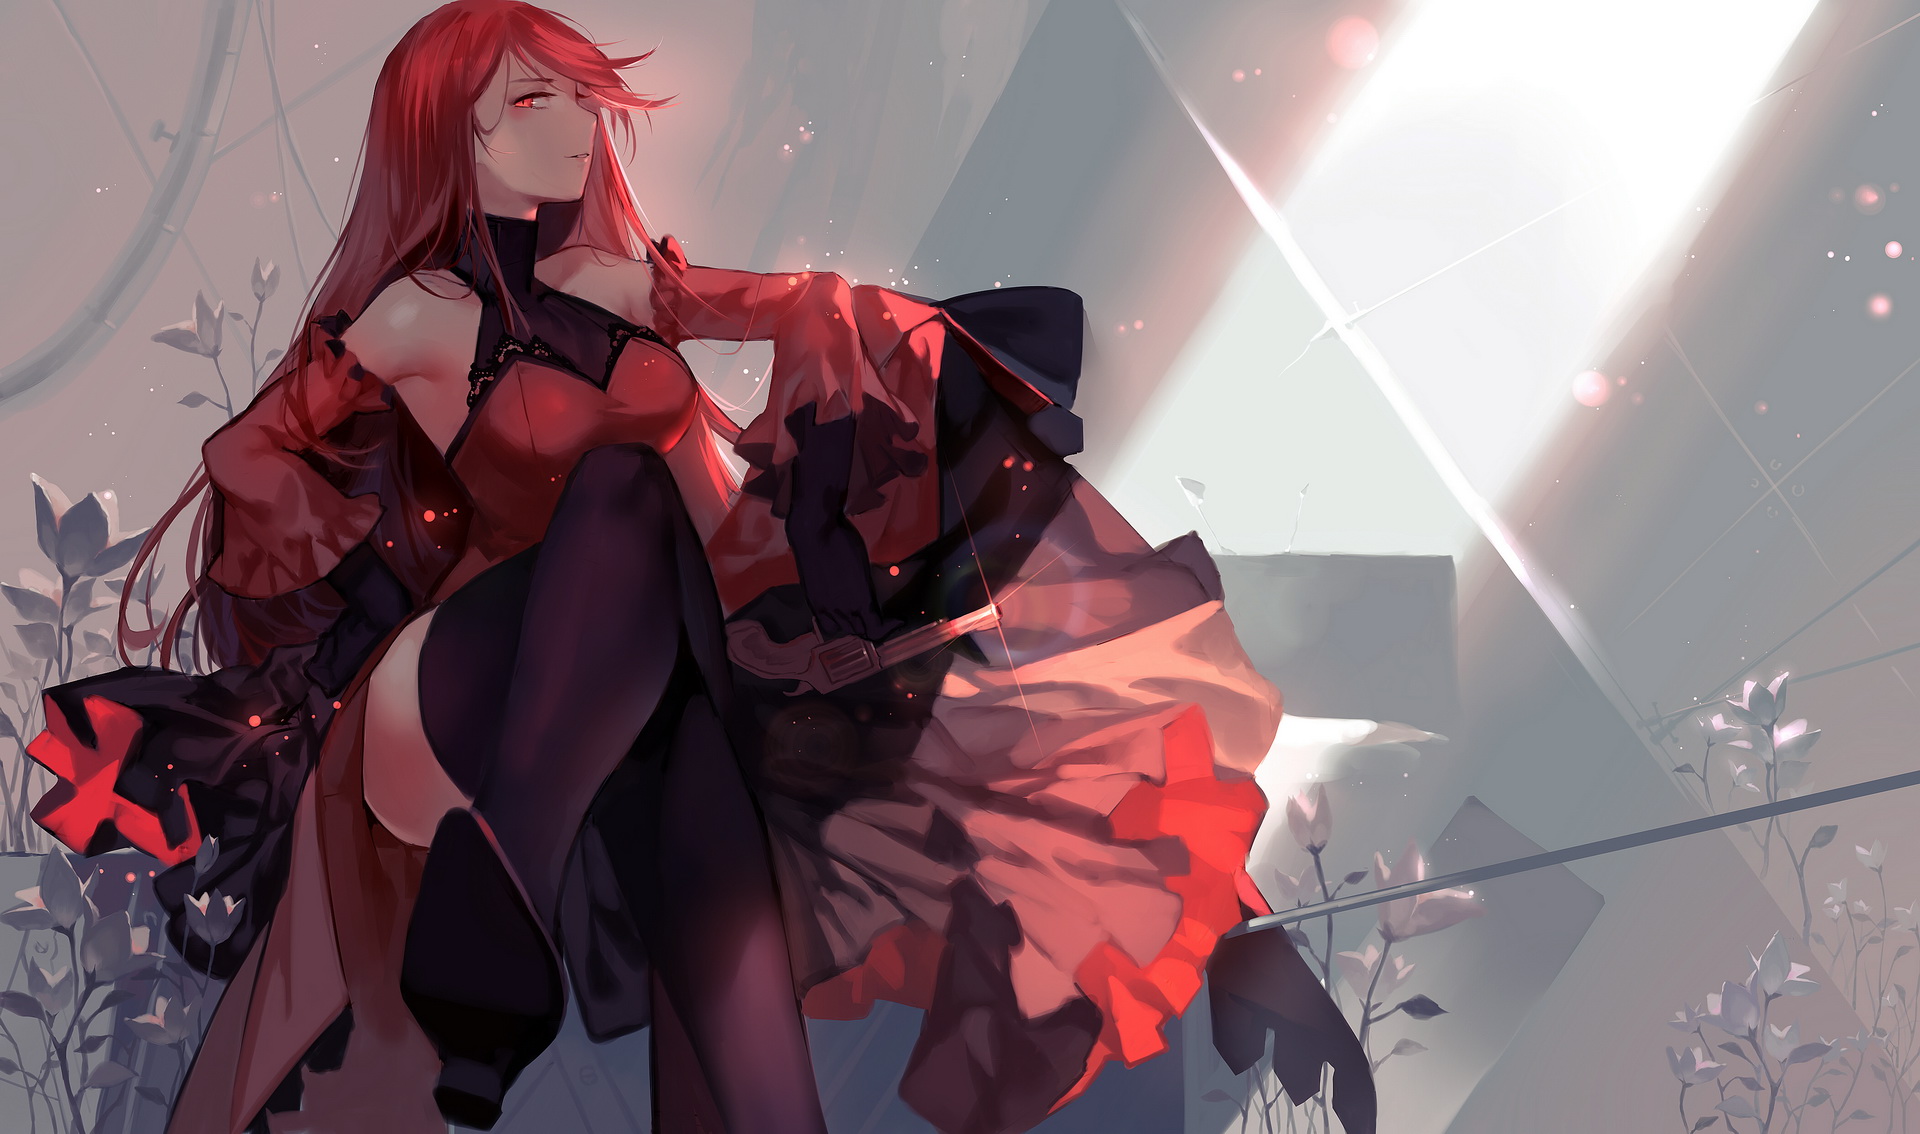 Pixiv Fantasia Wallpapers, Pictures, Images